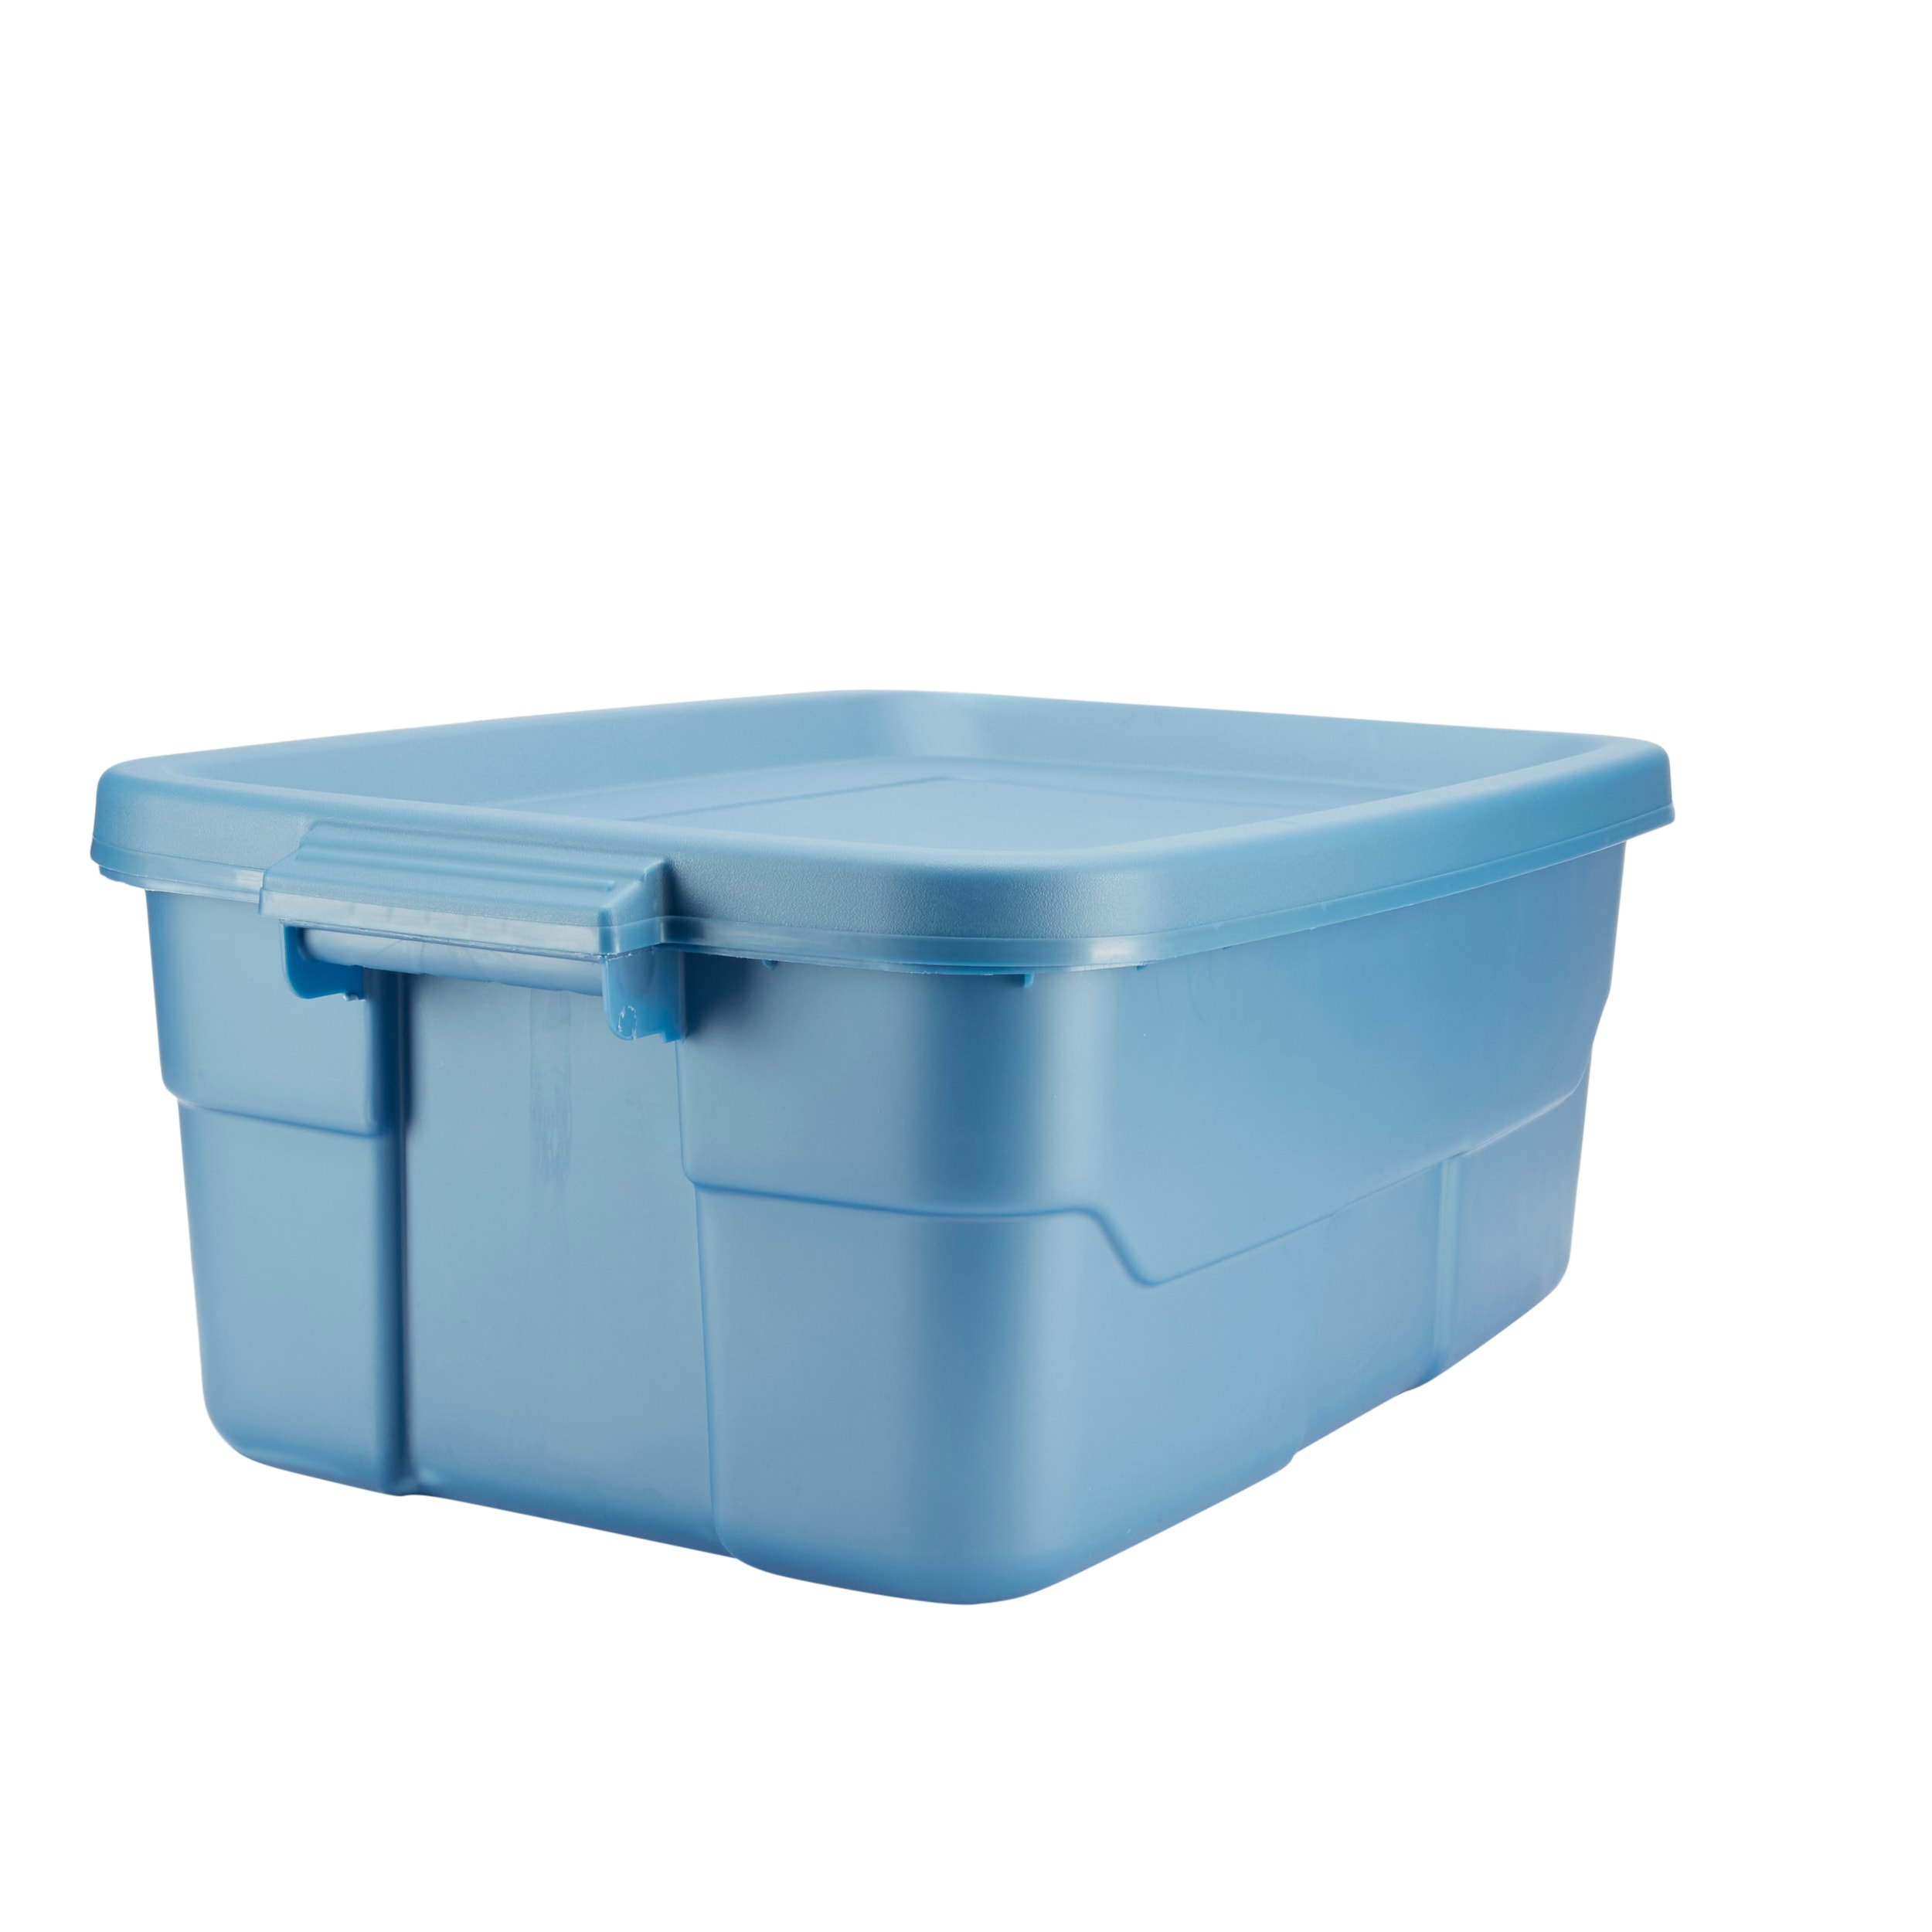 Teacher Created Resources Slate Blue Small Plastic Storage Bin, Pack of 6 -  Bed Bath & Beyond - 39180762